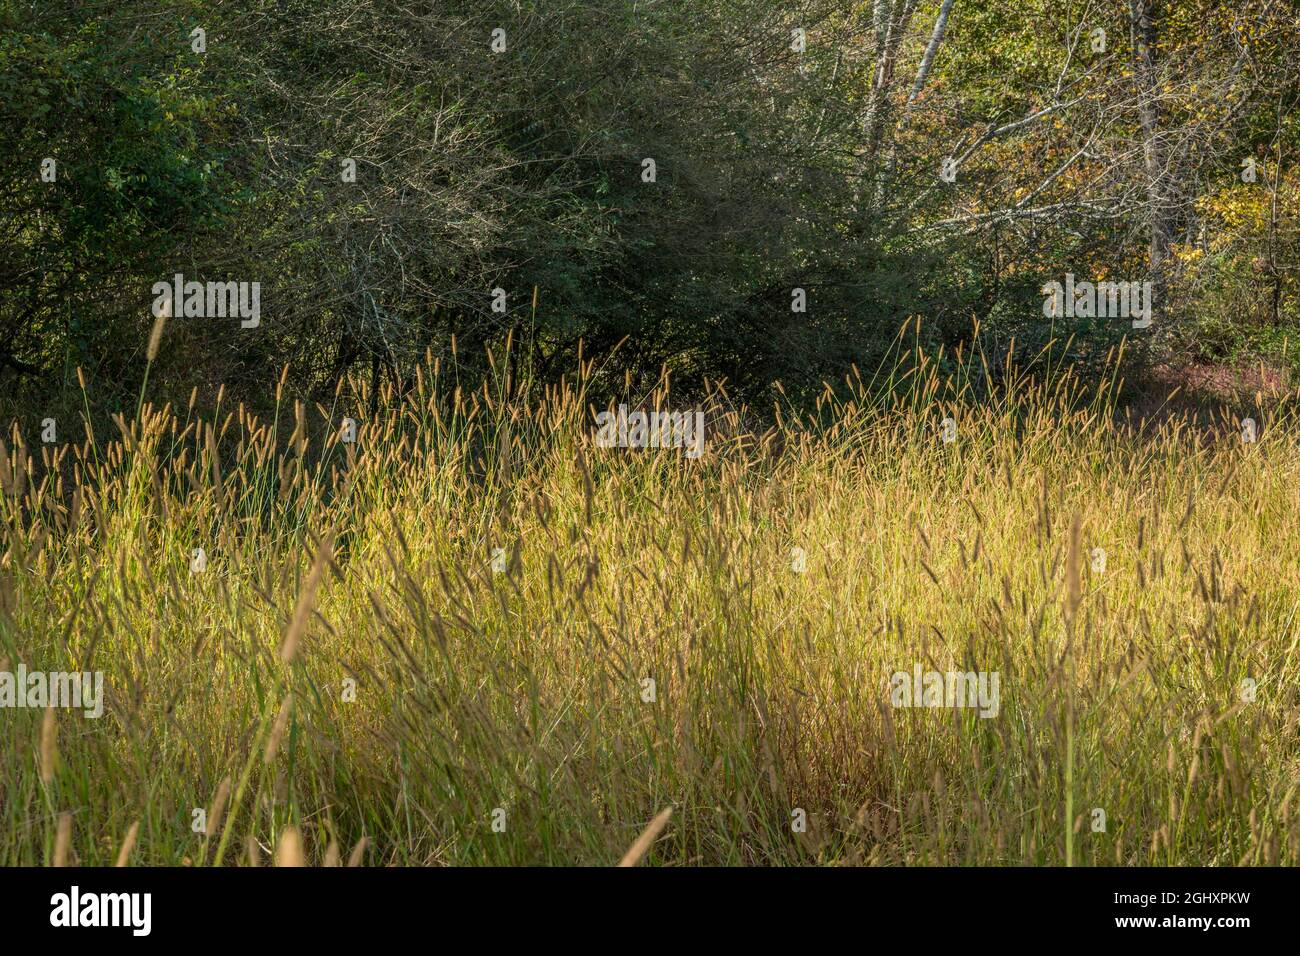 Tall grasses in a field closeup with seed heads highlighted by the sunlight shining through the woodlands in the background on a sunny day in autumn Stock Photo